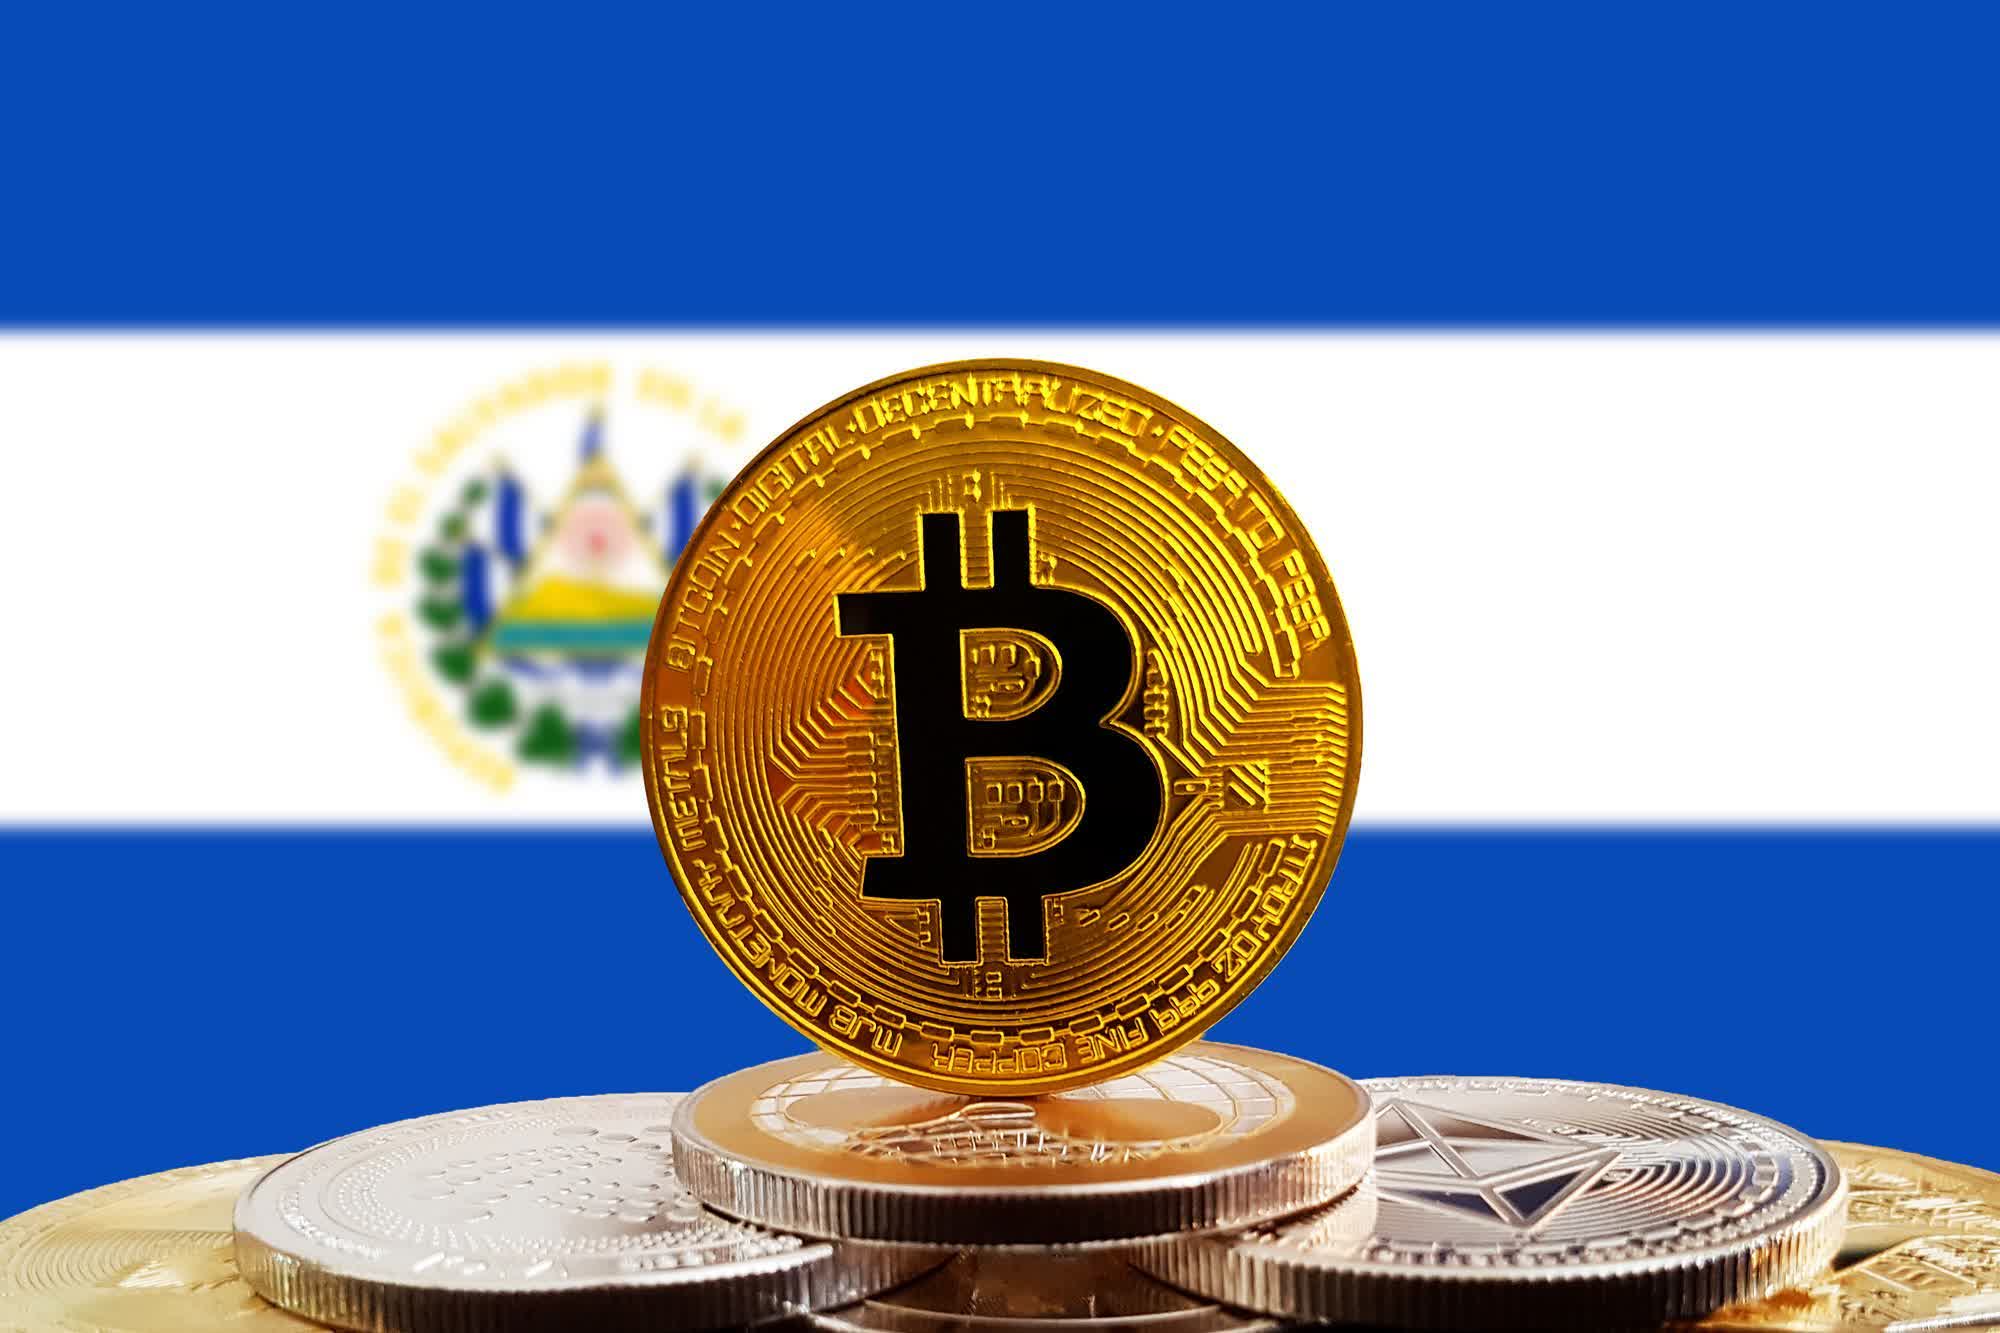 El Salvador Bitcoin holdings have lost half their value, minister says not to worry